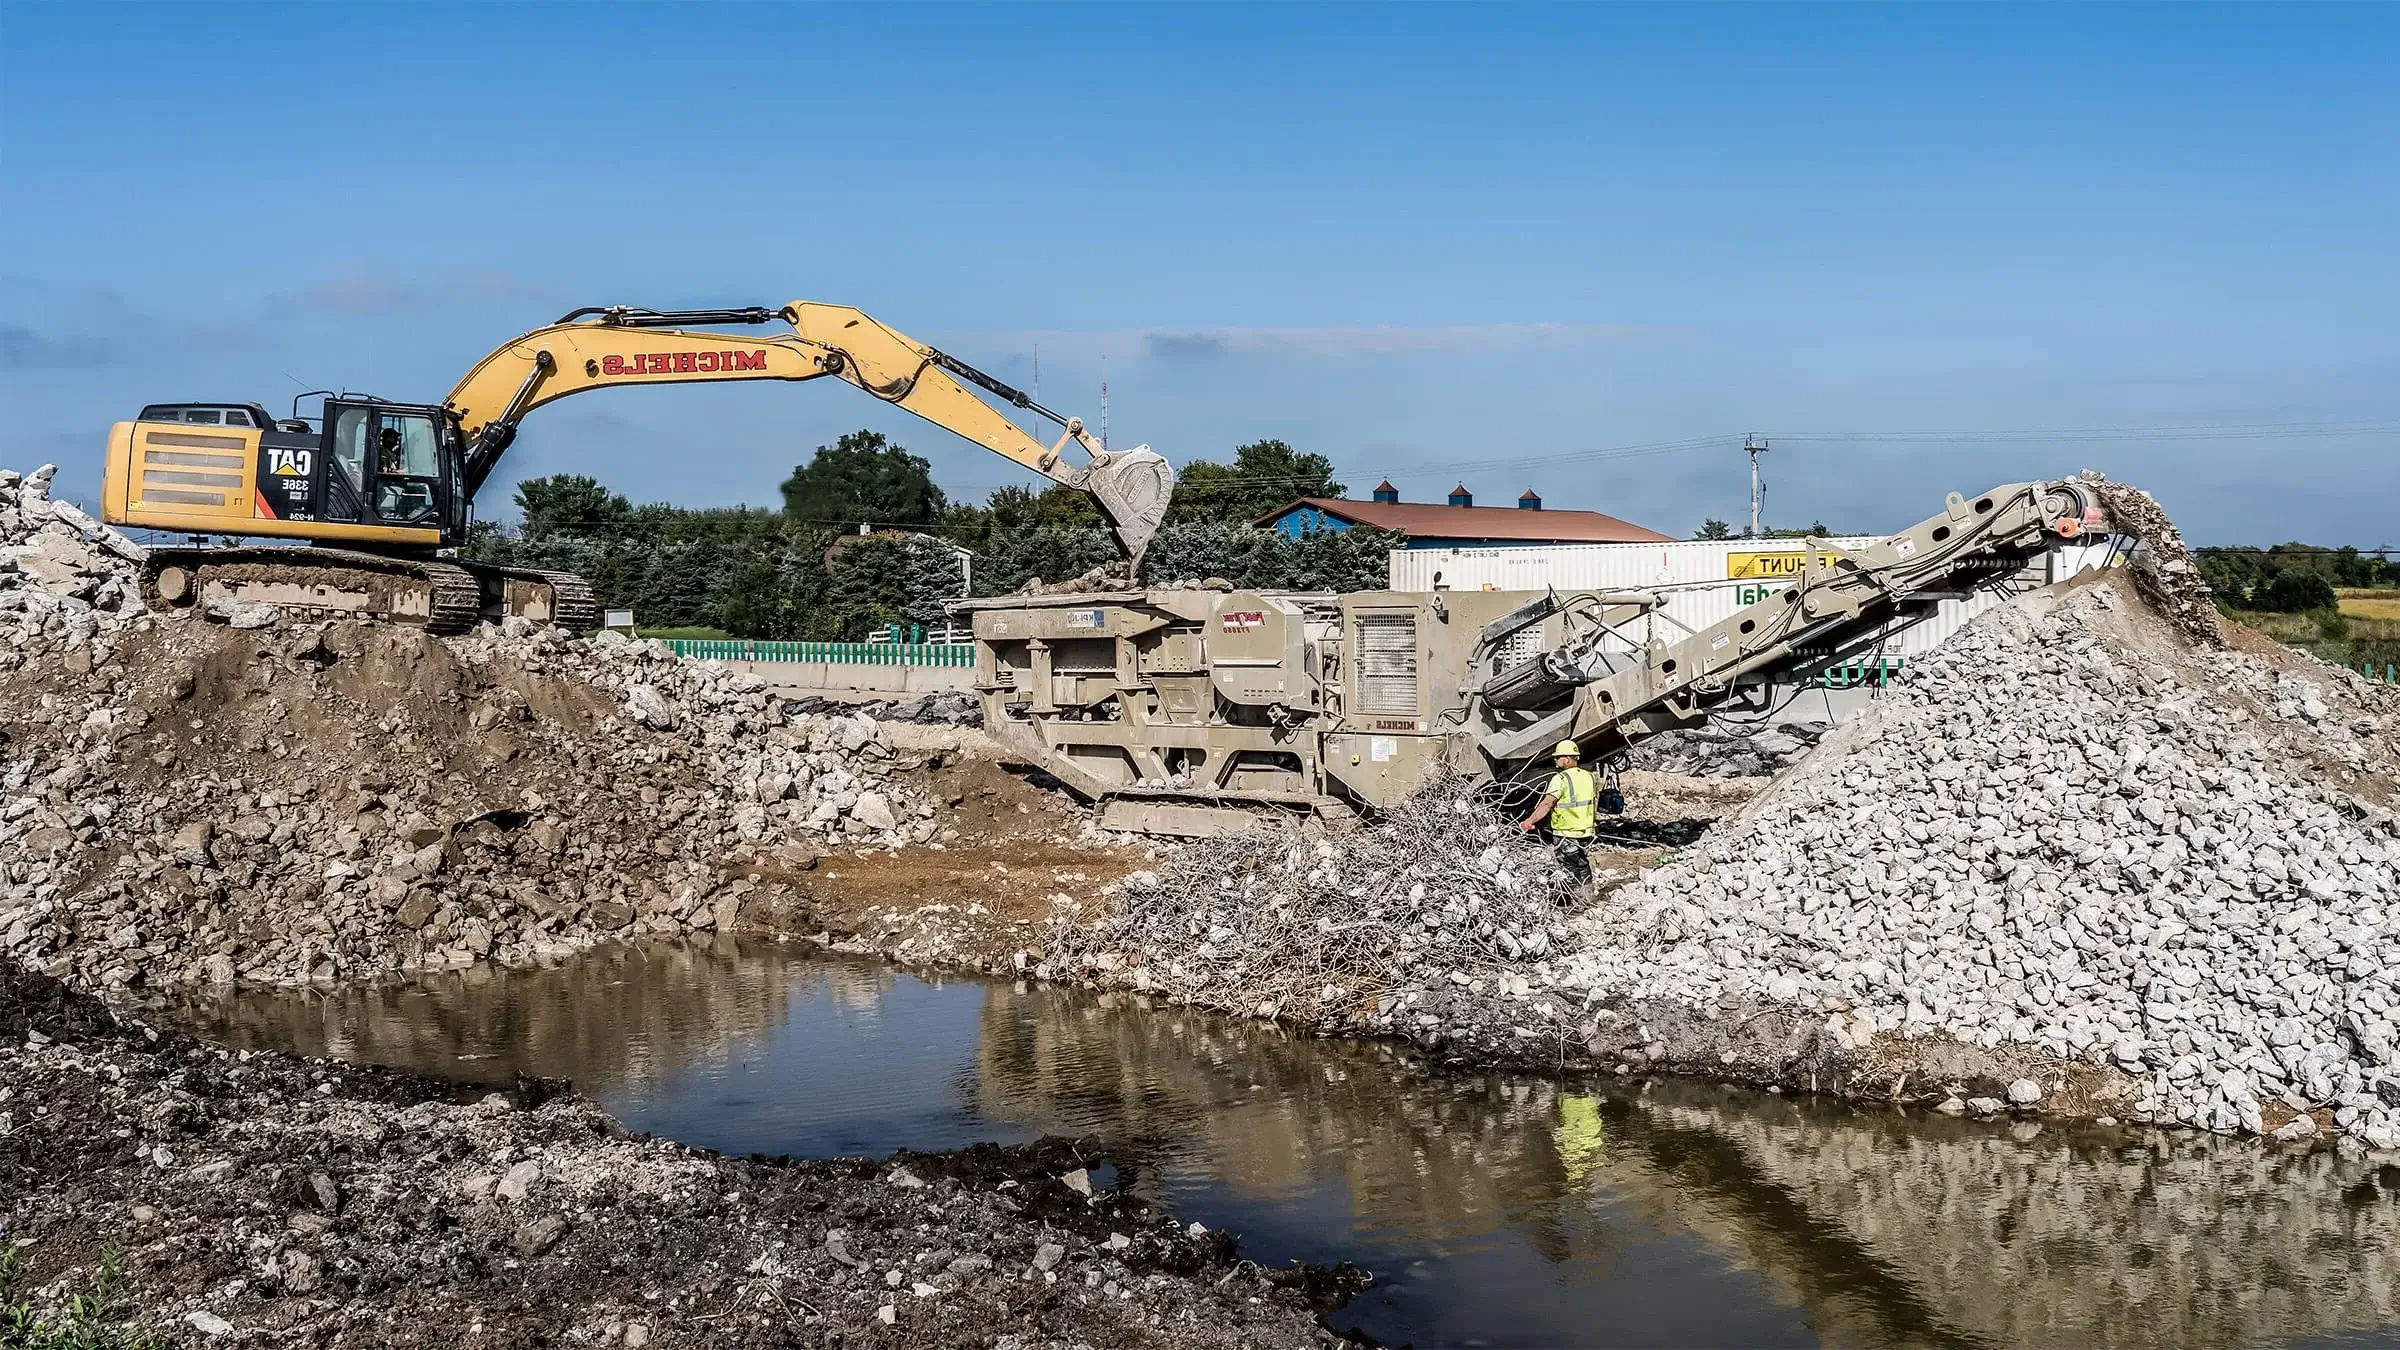 Michels operates a recycle crushing plant alongside an interstate highway to turn used concrete into aggregate